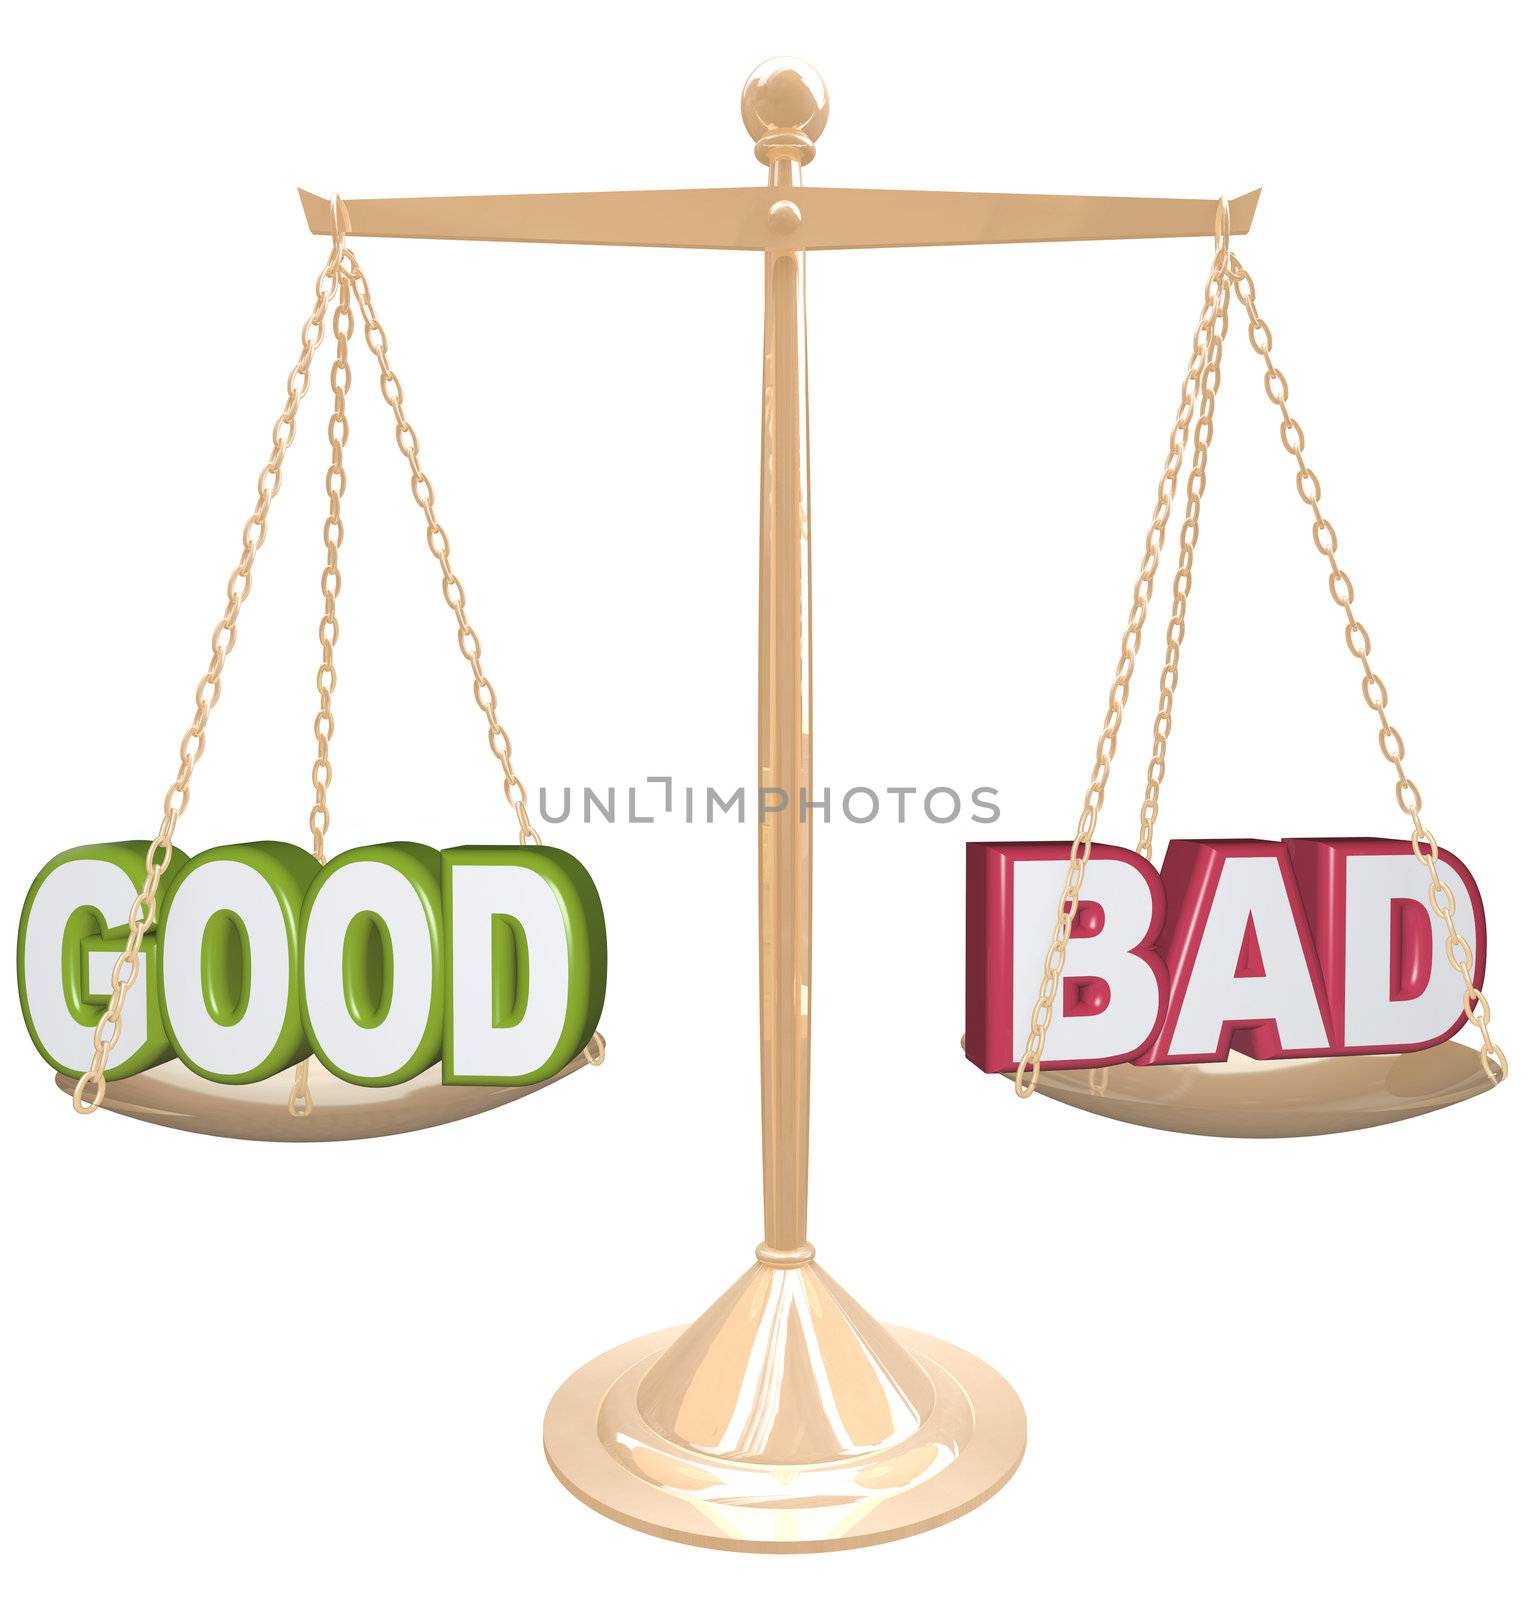 Good vs Bad Words on Scale Weighing Positives vs Negatives by iQoncept